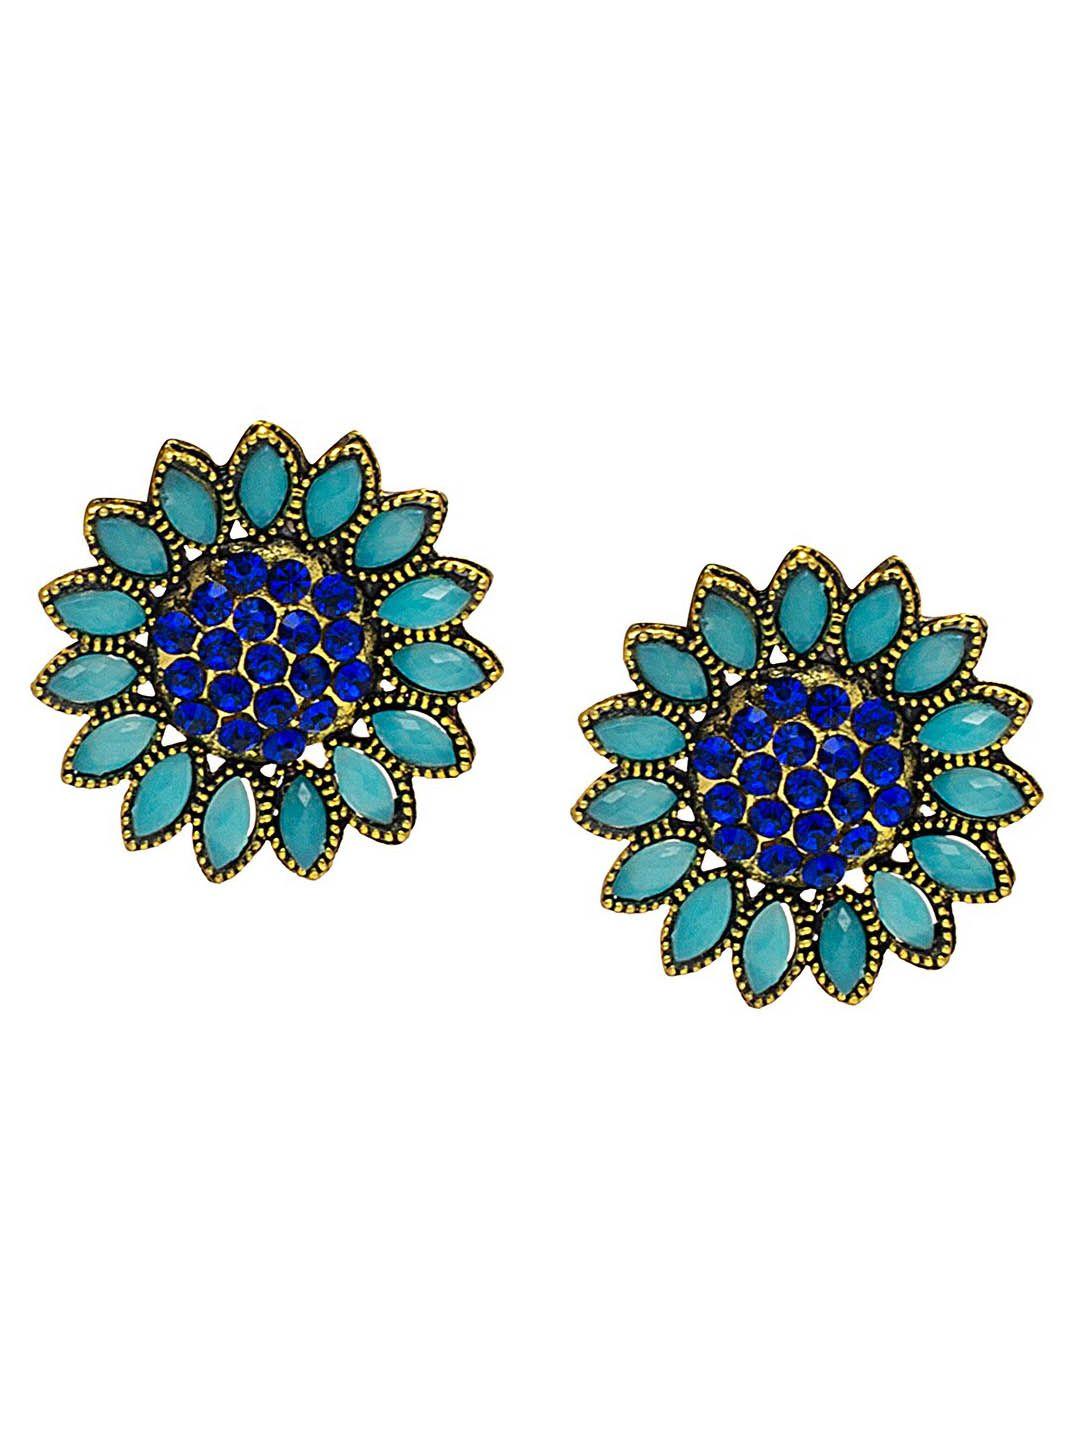 shining jewel - by shivansh gold-plated floral studs earrings